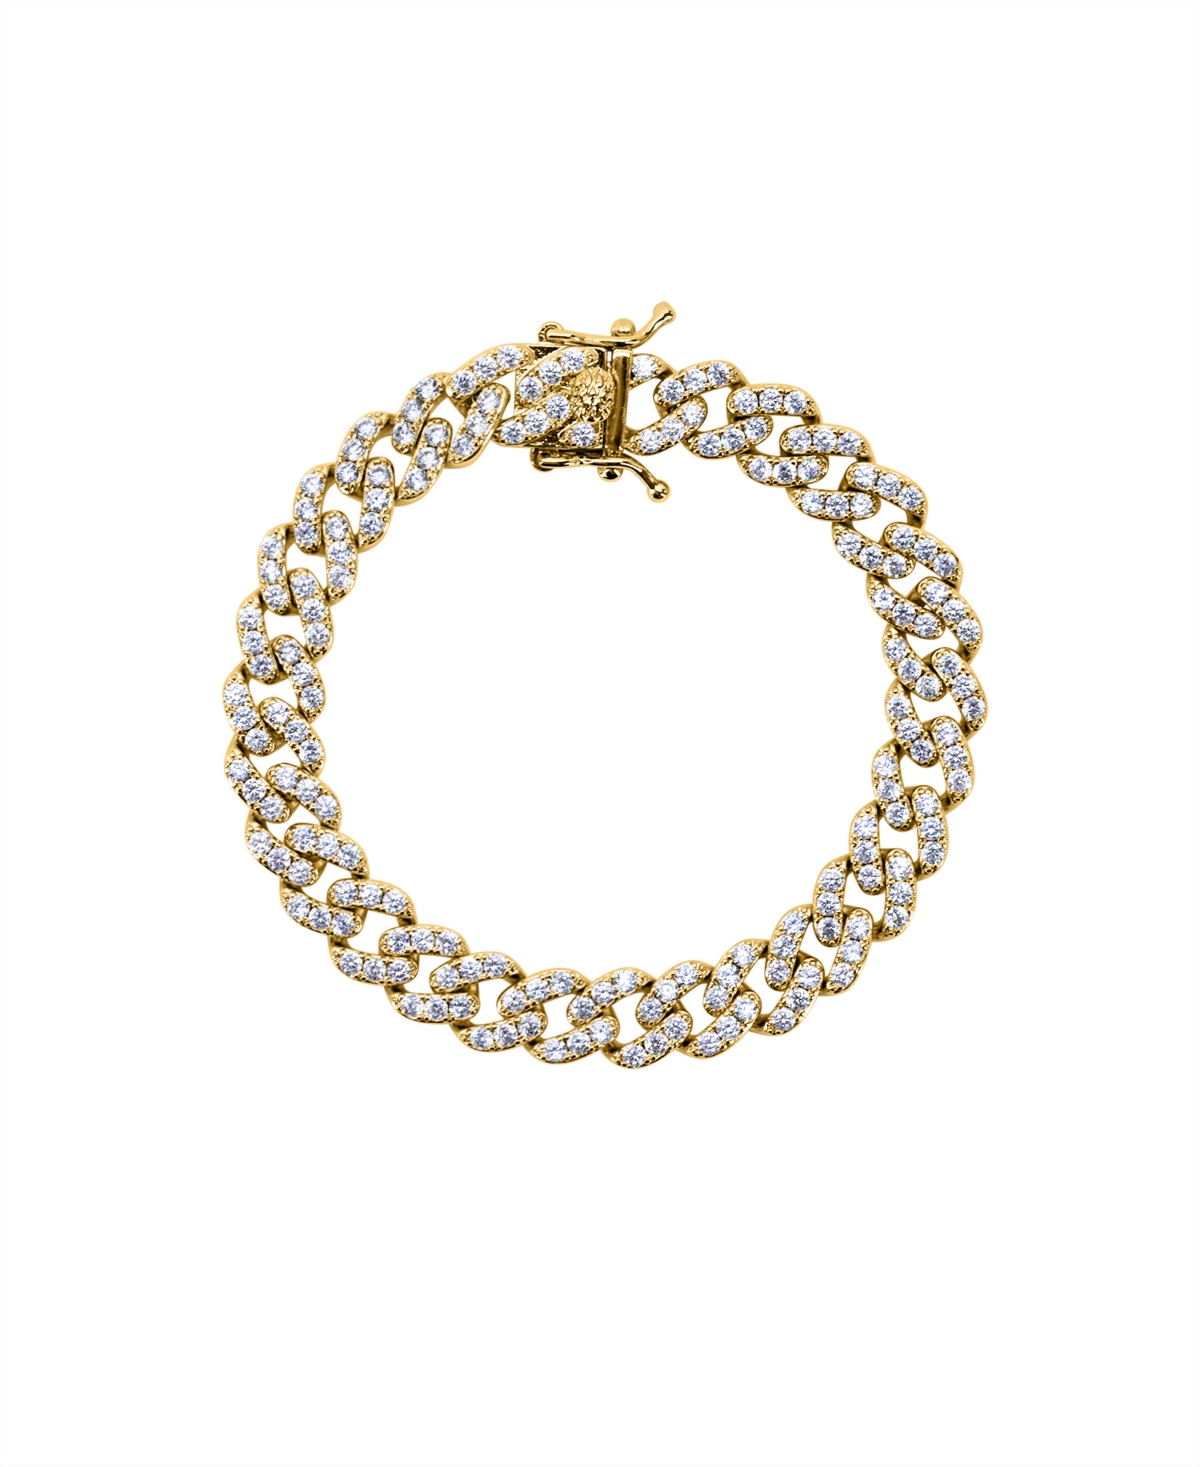 Oma The Label Frosty Link Collection 9mm Bracelet In 18k Gold- Plated Brass, 7"